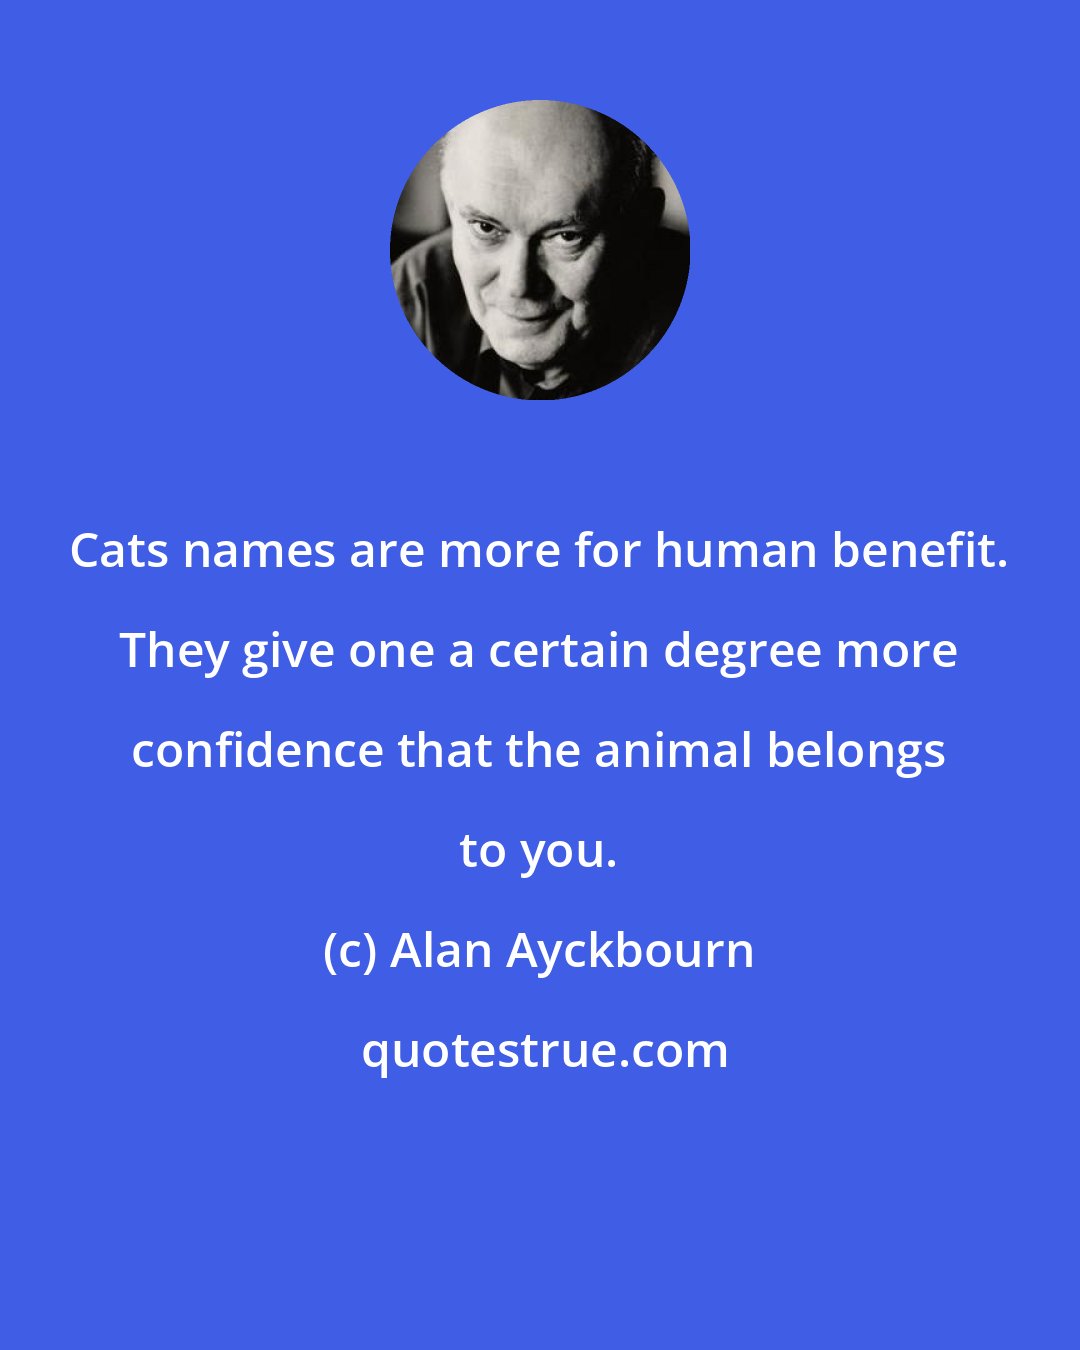 Alan Ayckbourn: Cats names are more for human benefit. They give one a certain degree more confidence that the animal belongs to you.